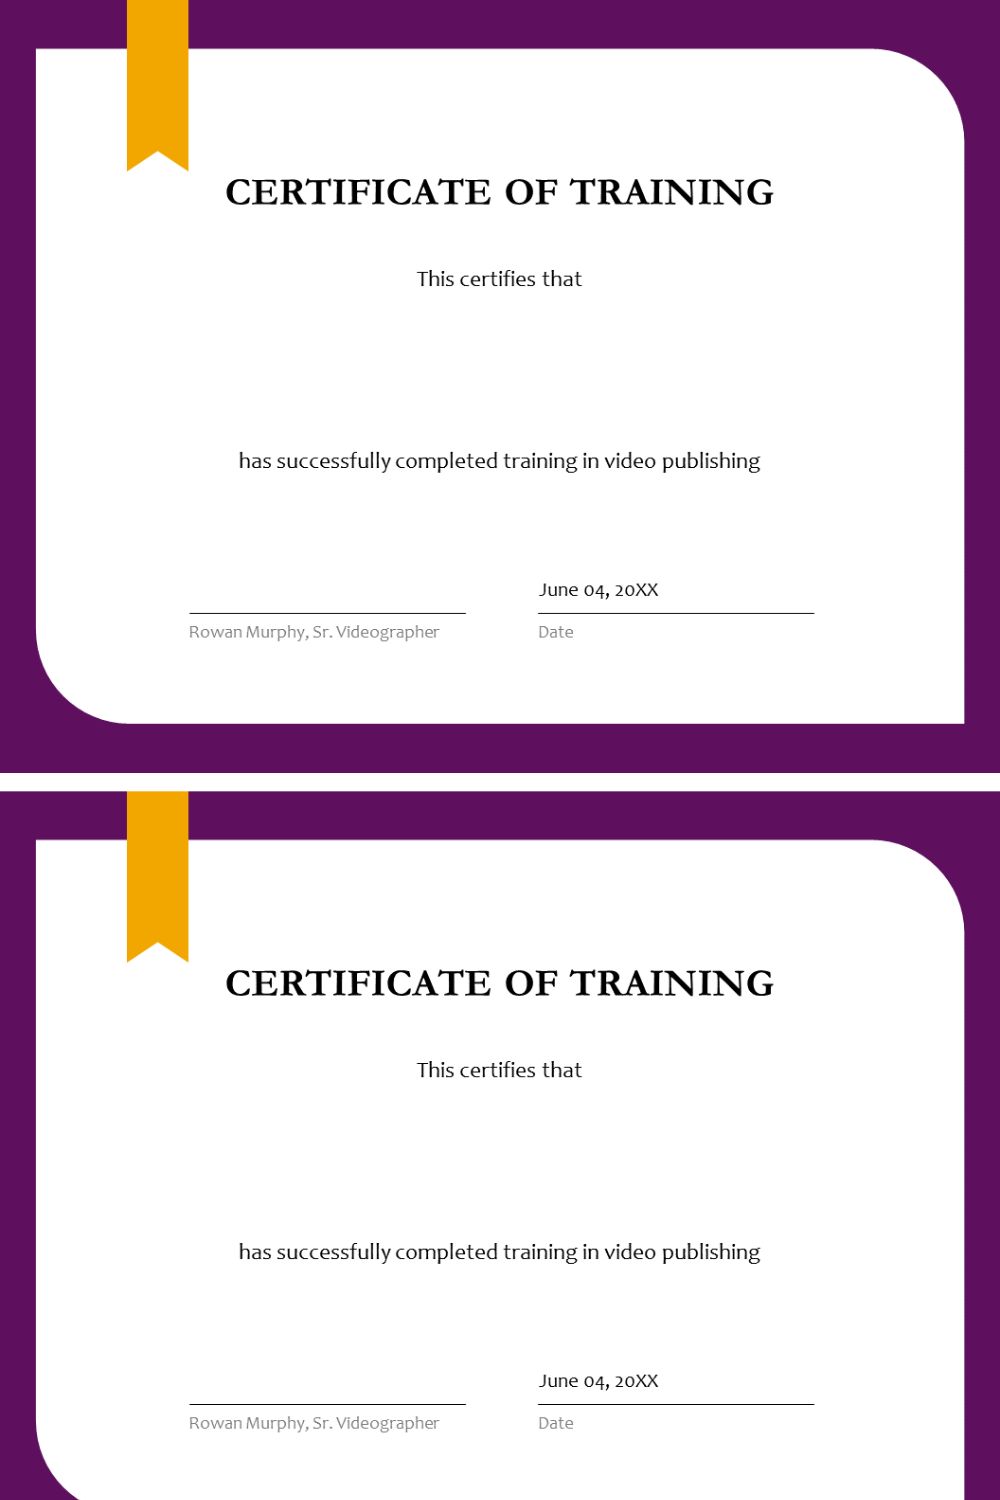 Certificate of training powerpoint presentation template pinterest preview image.